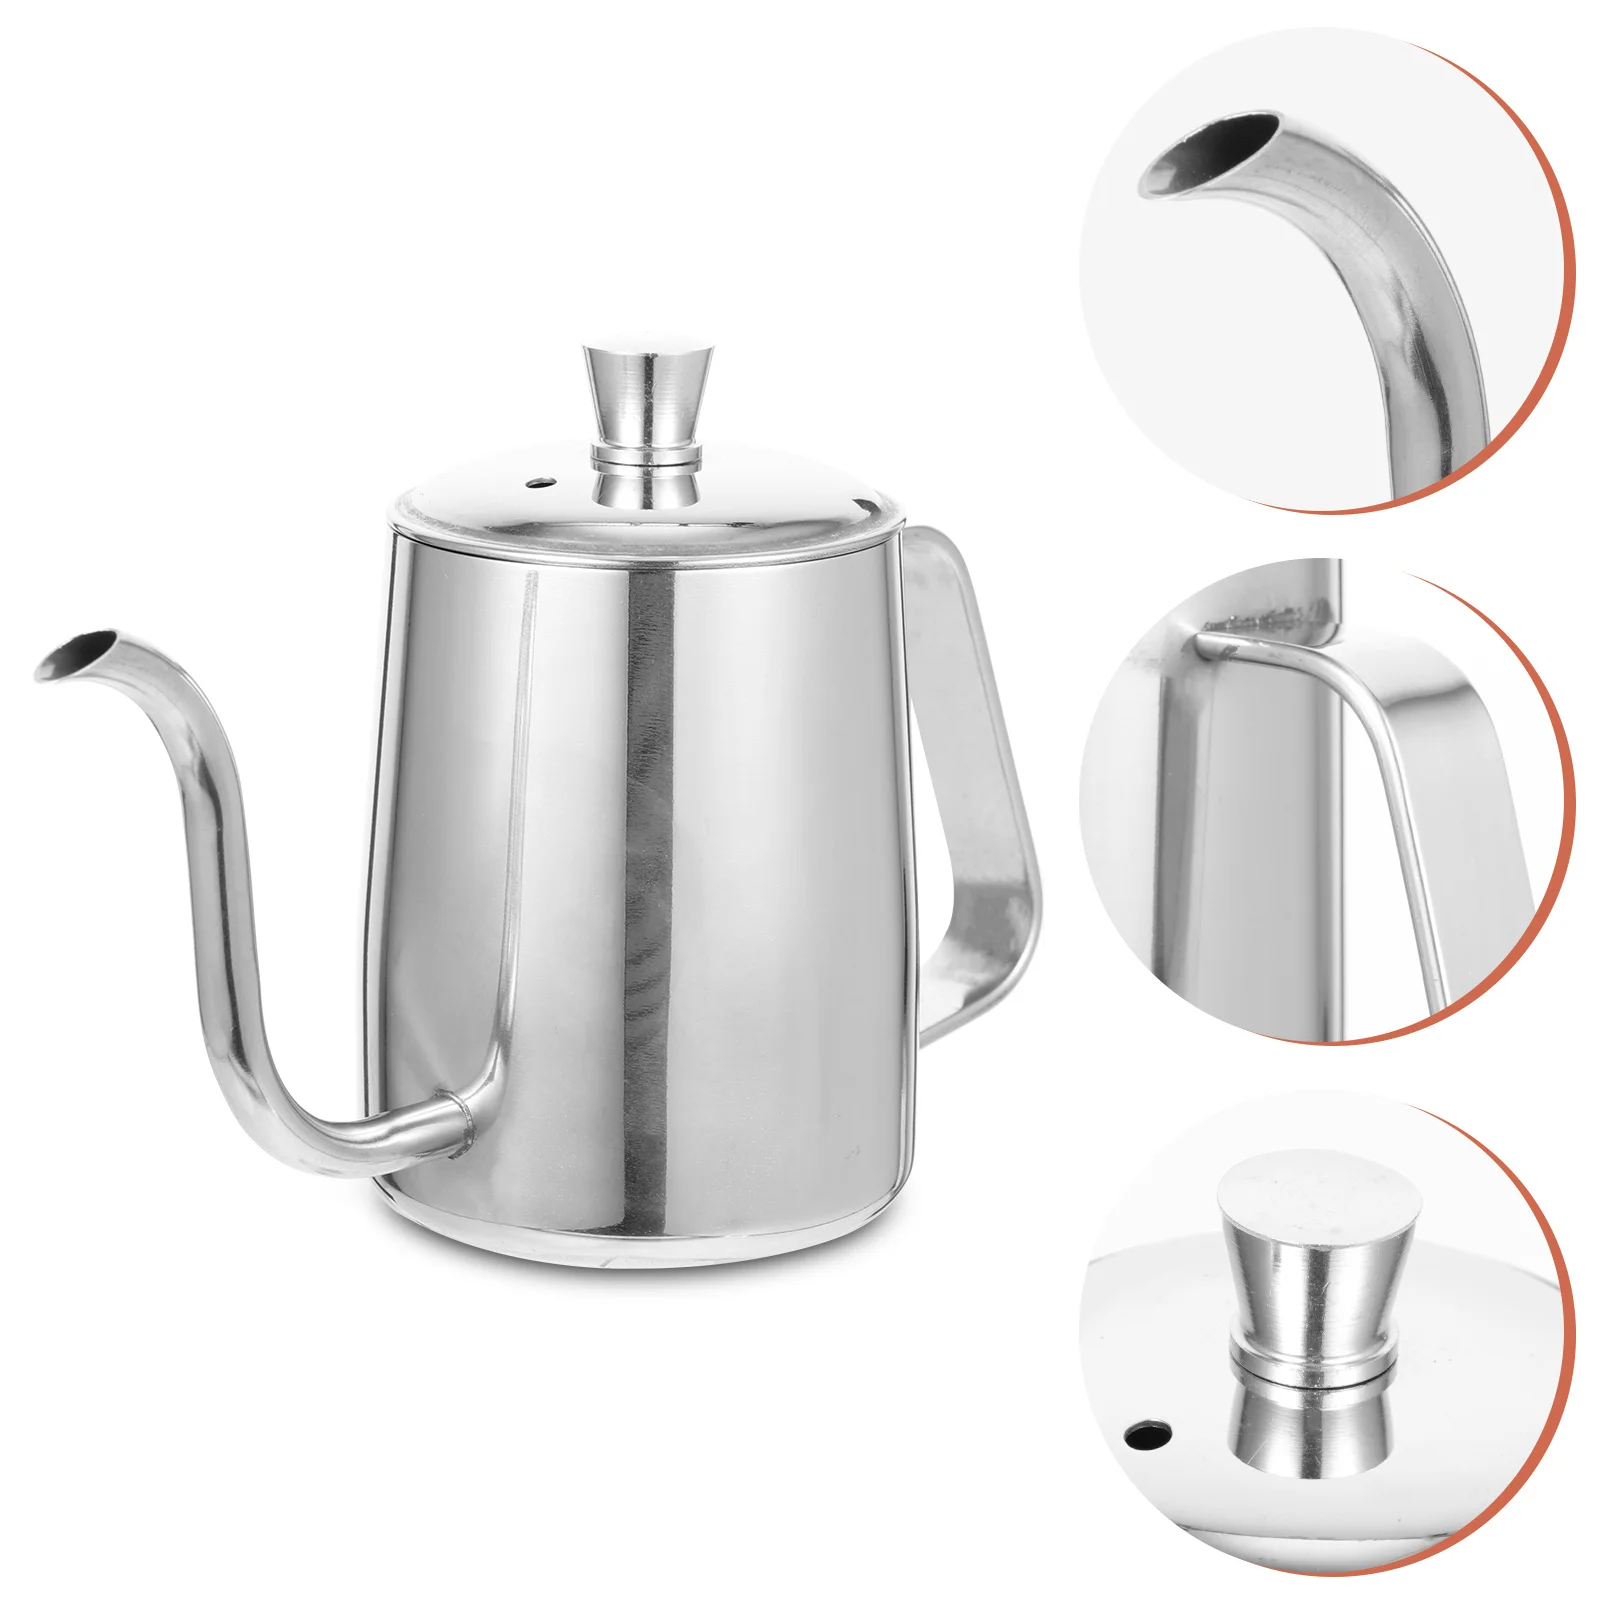 

Kettle Coffee Tea Whistling Stainless Steel Pot Water Stovetop Teapot Pitchers Pots Drip Over Maker Pour Gooseneck Drinking